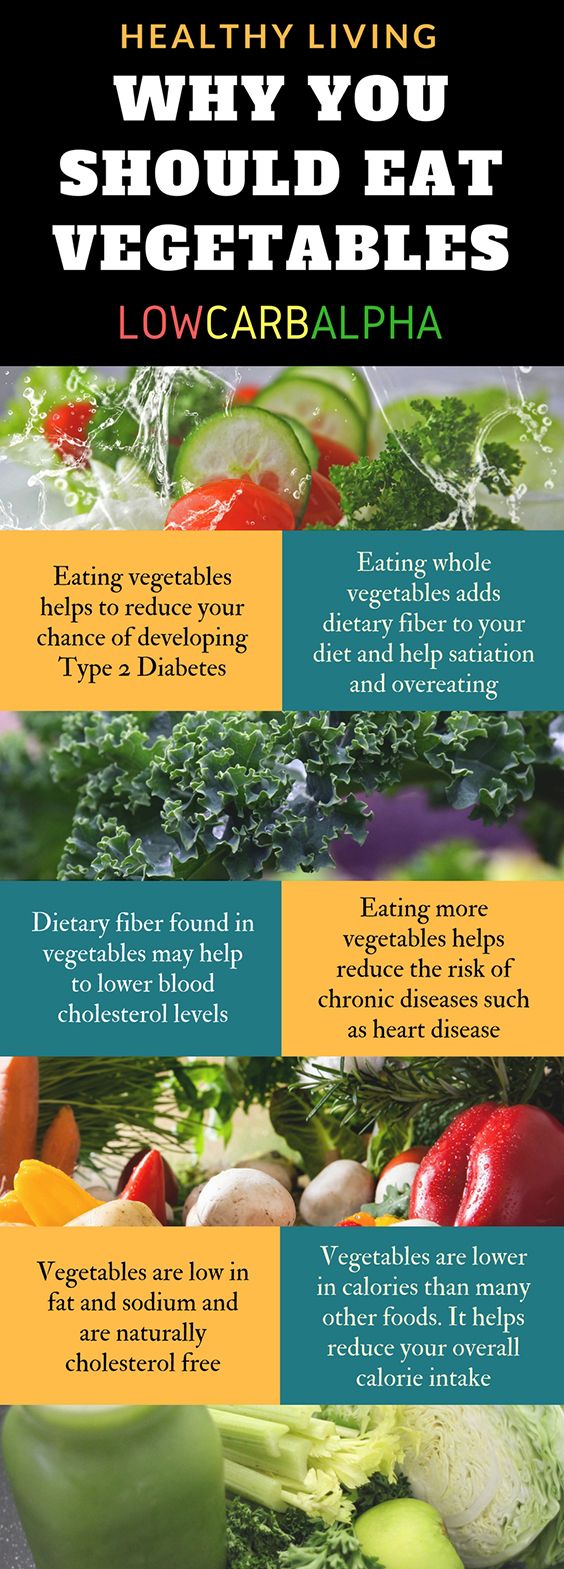 Healthy living and reasons why you should eat vegetables #vegetables #nutrition #weightloss #lowcarbalpha